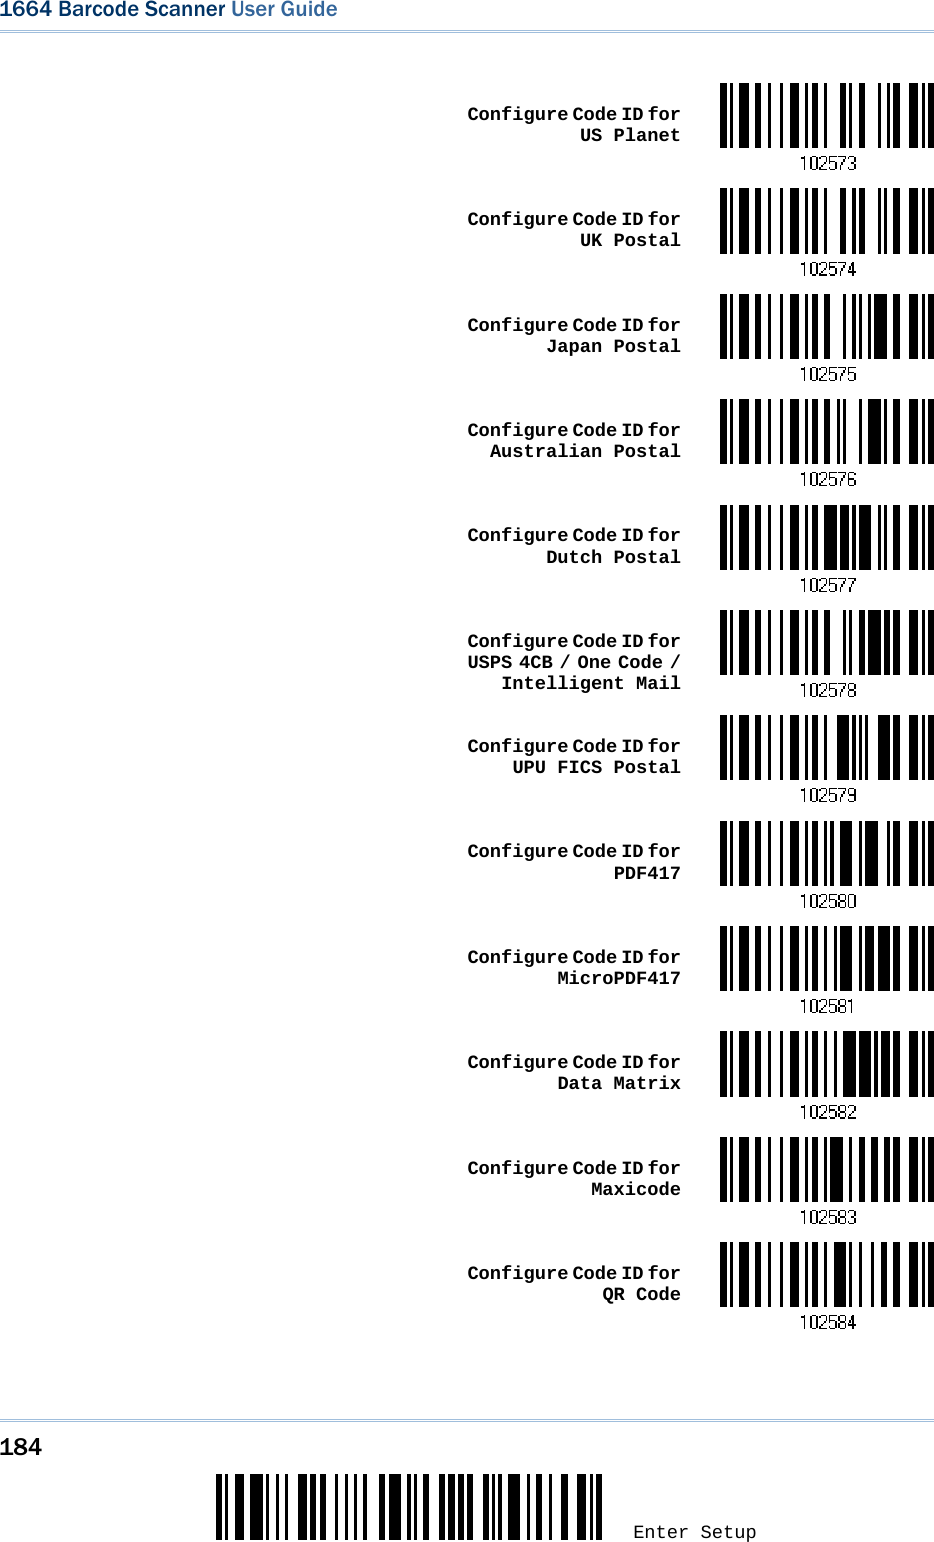 184 Enter Setup 1664 Barcode Scanner User Guide   Configure Code ID for US Planet  Configure Code ID for UK Postal  Configure Code ID for Japan Postal  Configure Code ID for Australian Postal Configure Code ID for Dutch Postal  Configure Code ID for USPS 4CB / One Code / Intelligent Mail  Configure Code ID for UPU FICS Postal Configure Code ID for PDF417  Configure Code ID for MicroPDF417  Configure Code ID for Data Matrix  Configure Code ID for Maxicode  Configure Code ID for QR Code 